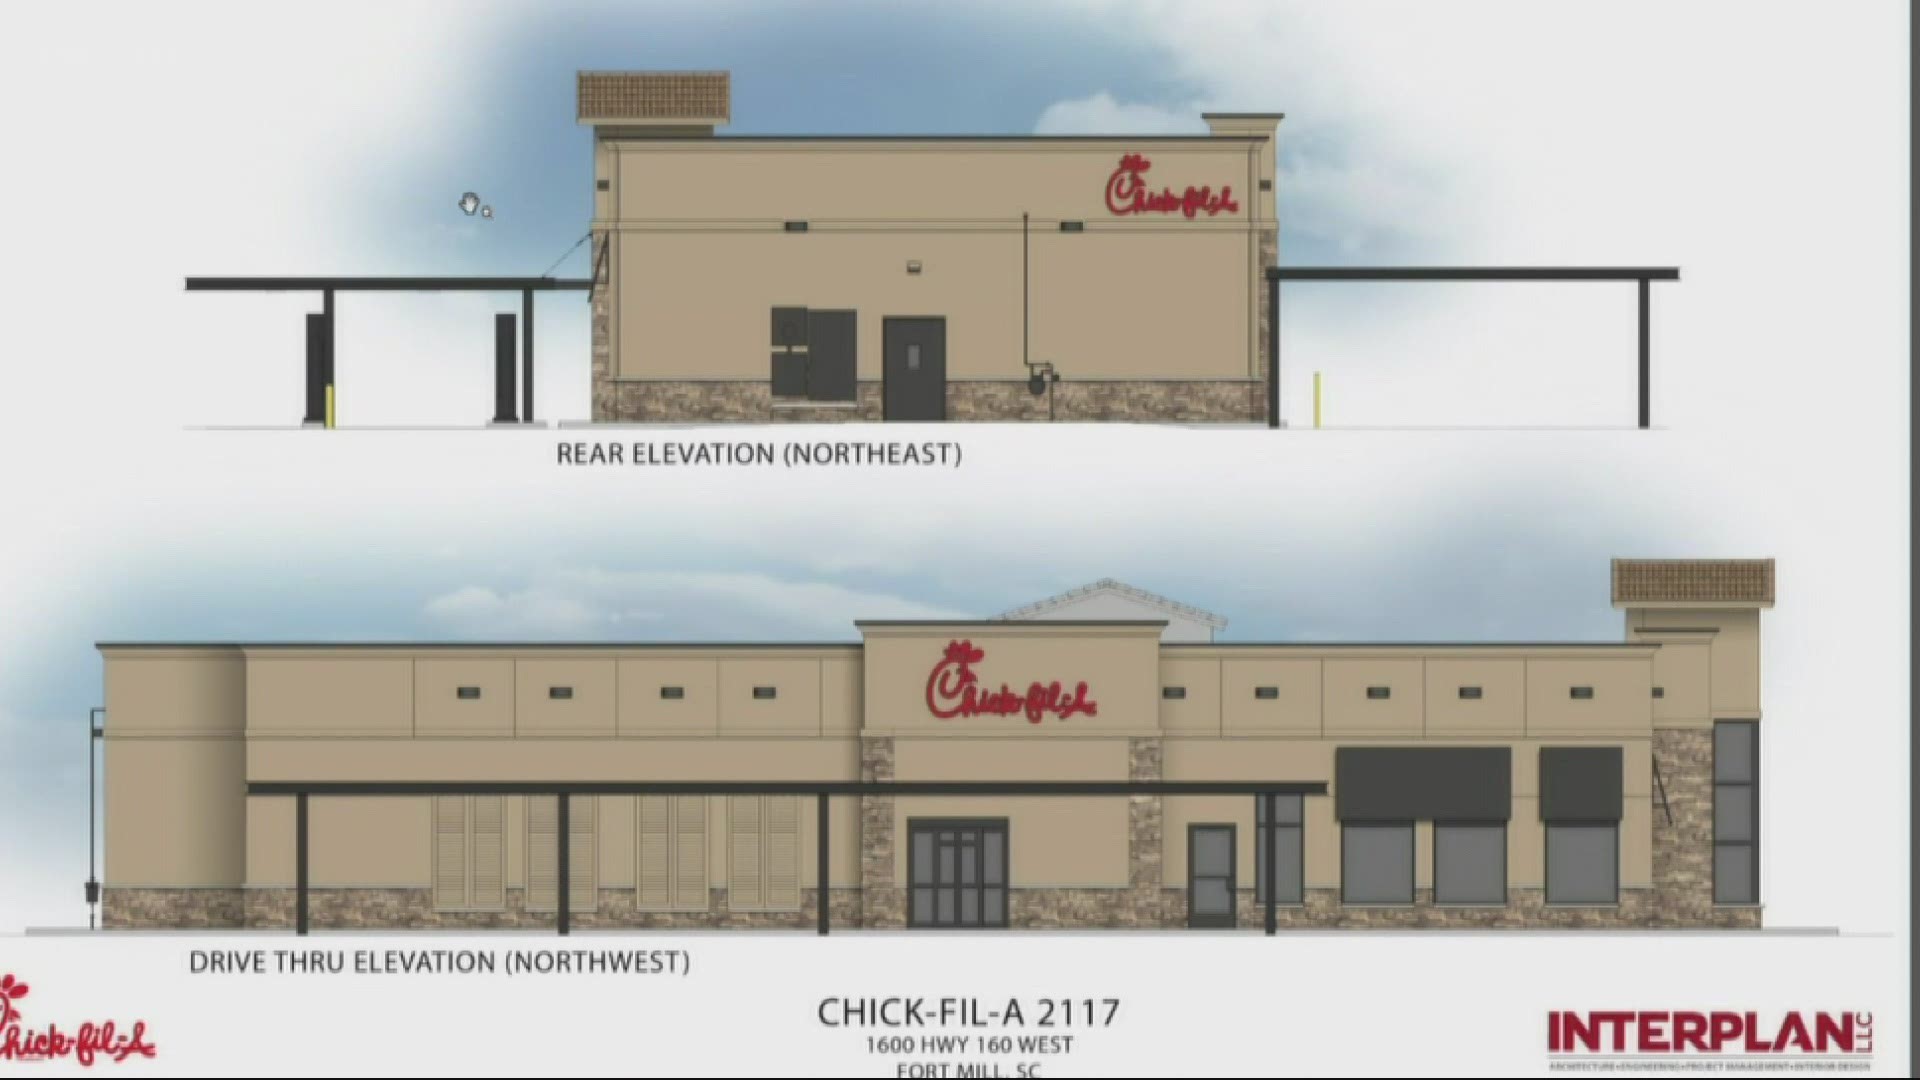 The Chick-fil-A at Baxter Village in Fort Mill will be adding a second drive-thru lane soon. This should help ease traffic problems in that area.